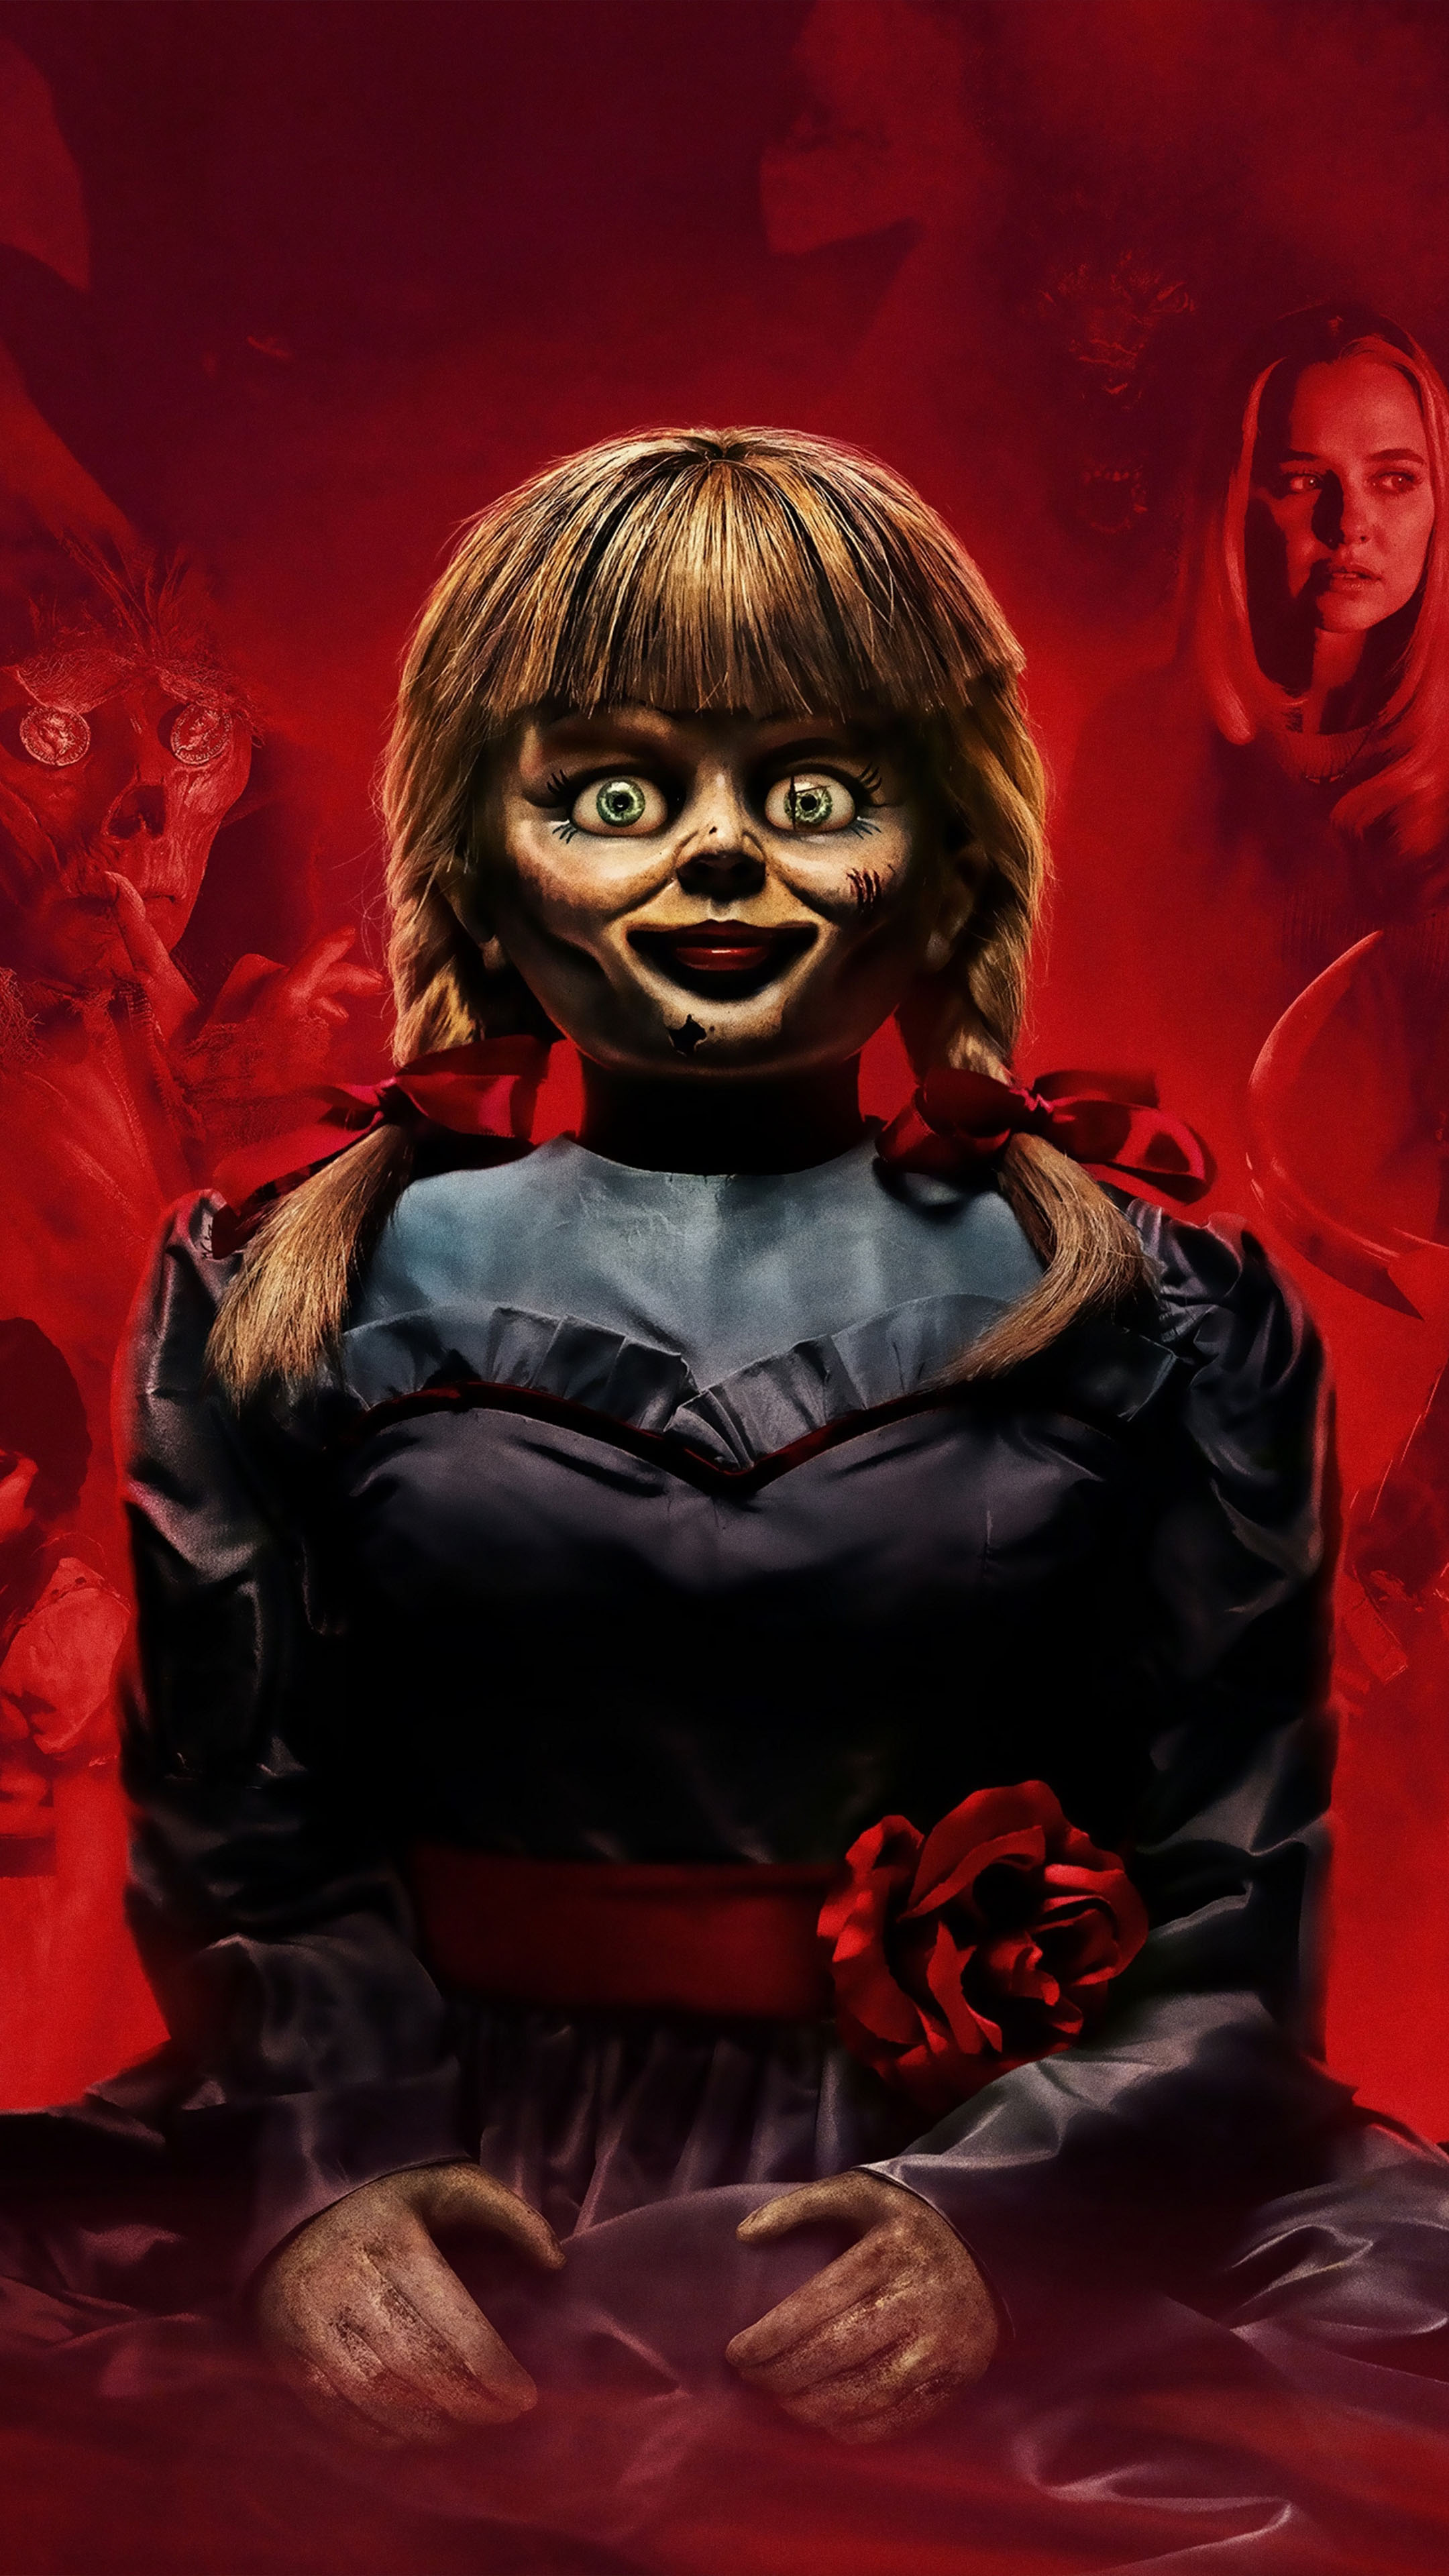 Annabelle Doll Comes Home 2019 Free 4K Ultra HD Mobile Wallpaper